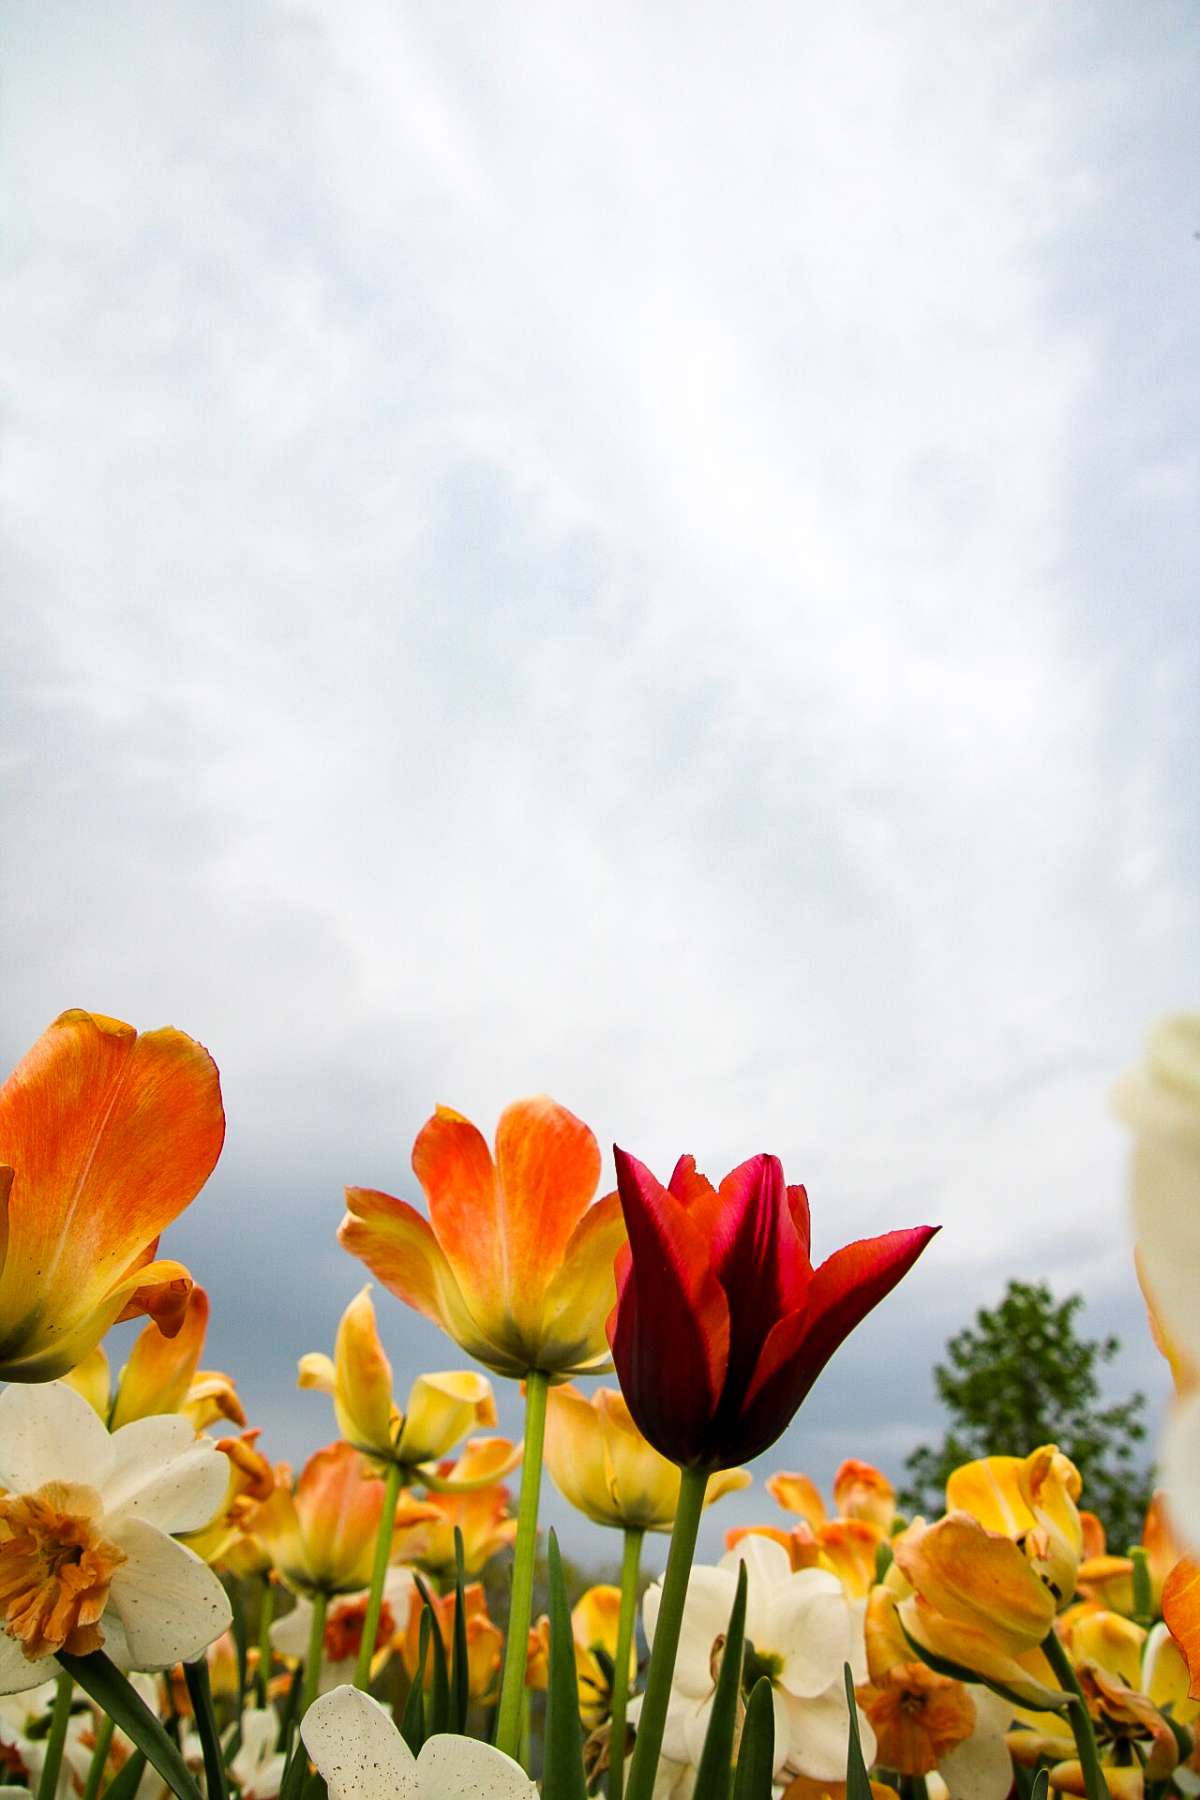 tulips against a gray spring sky